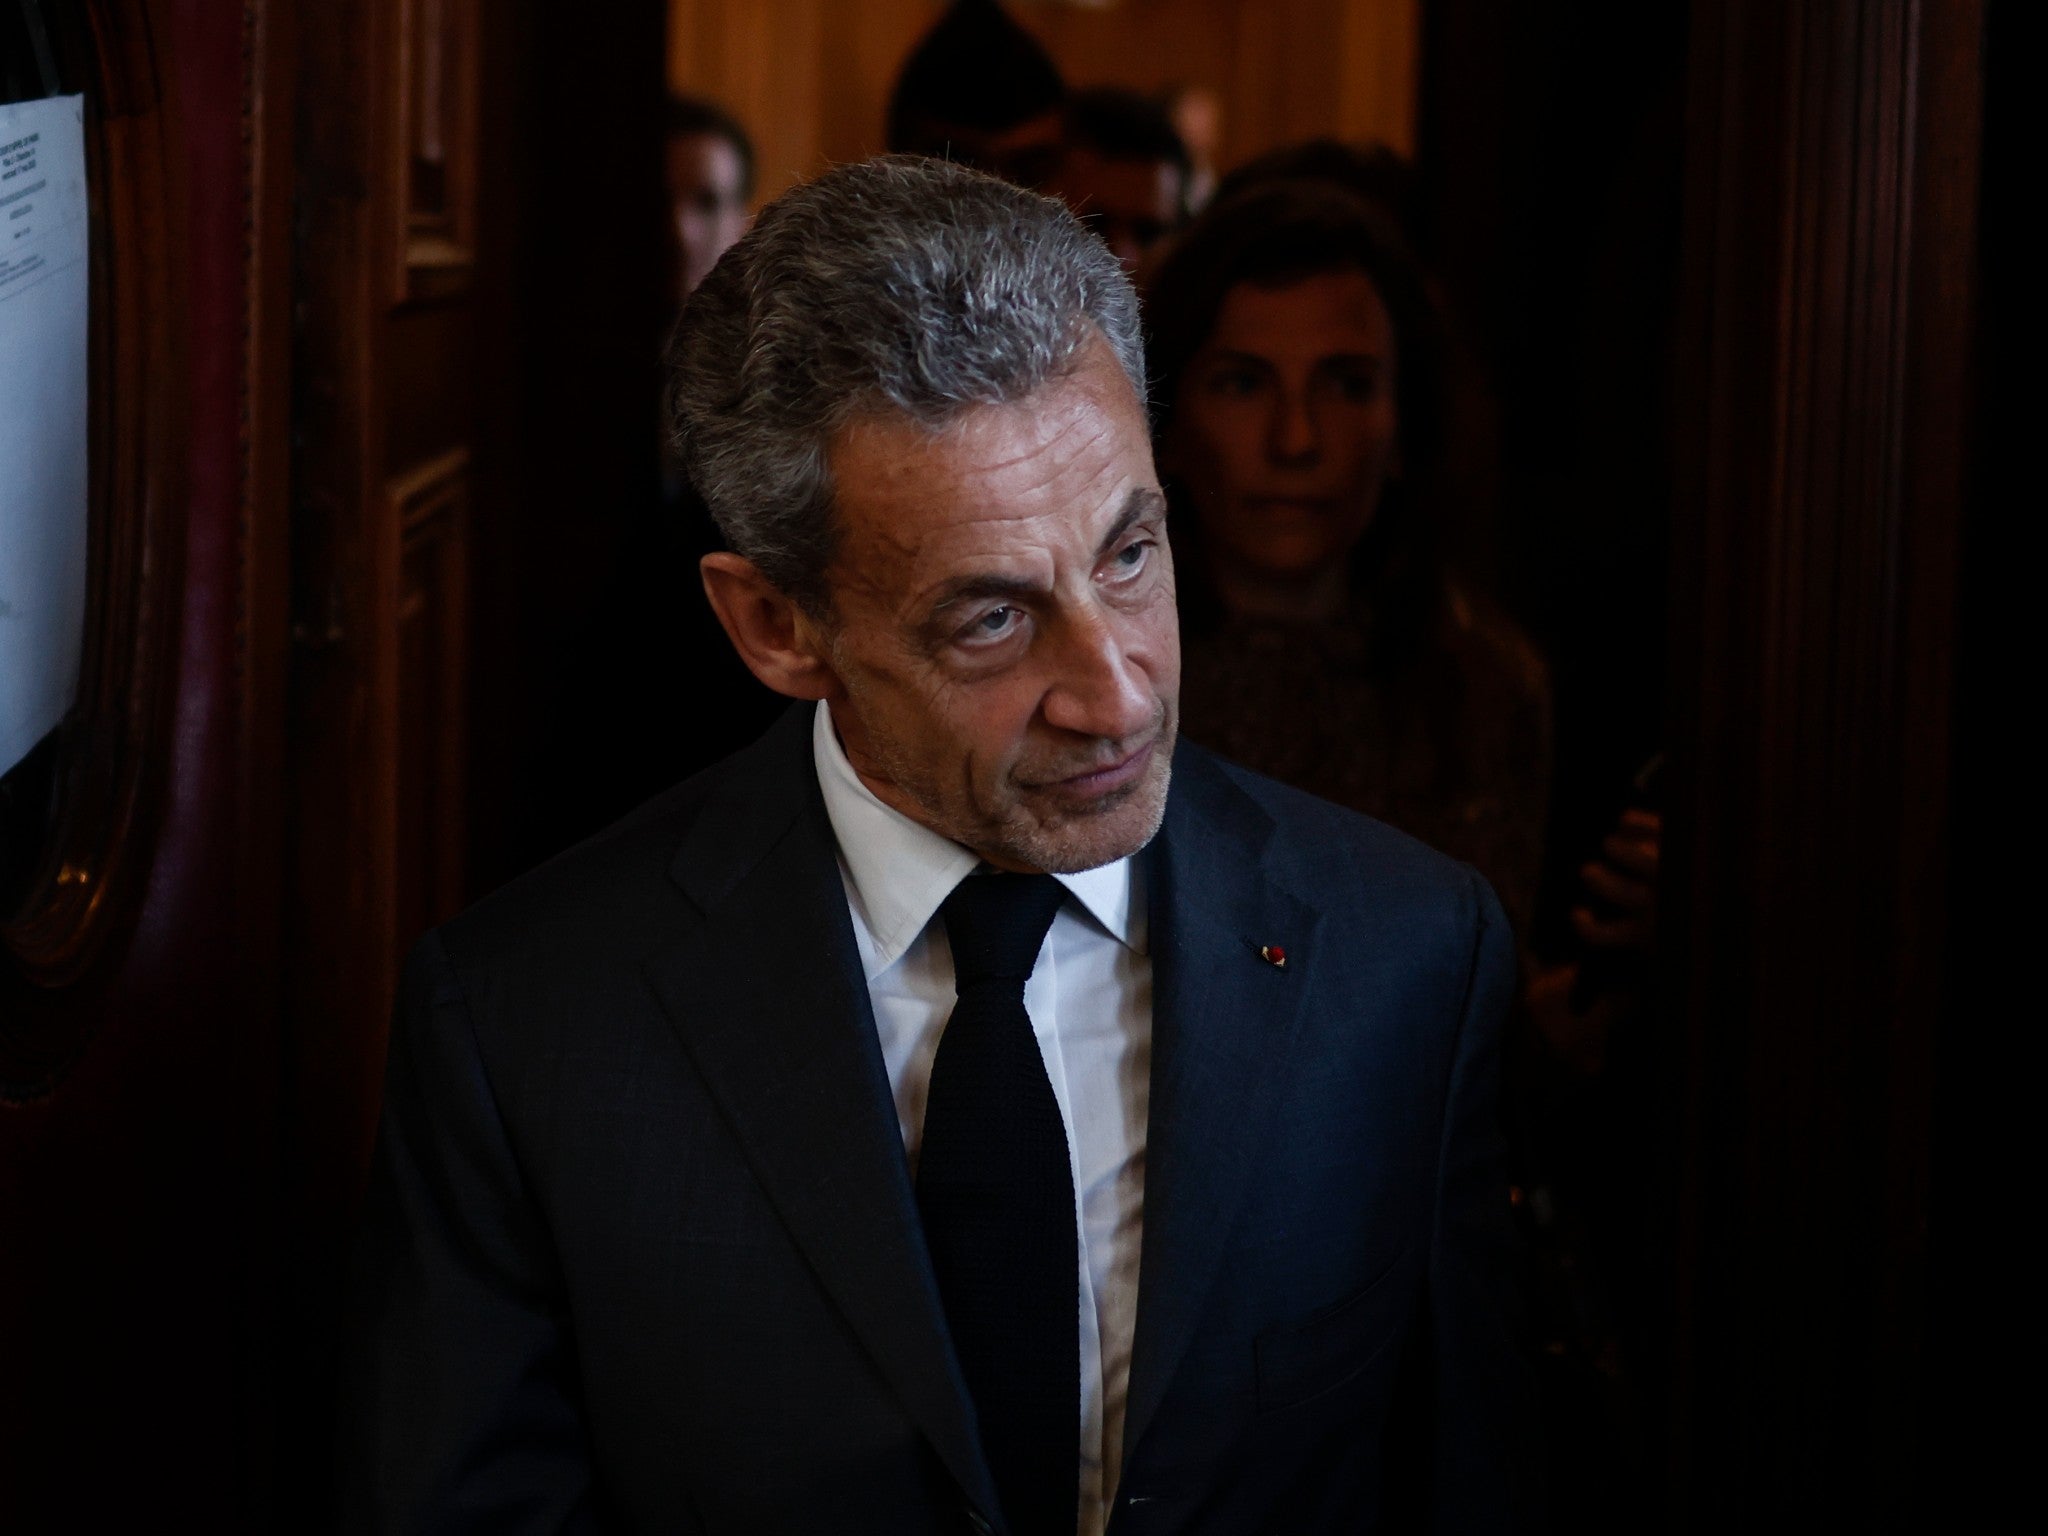 Nicolas Sarkozy exits the courthouse after the verdict